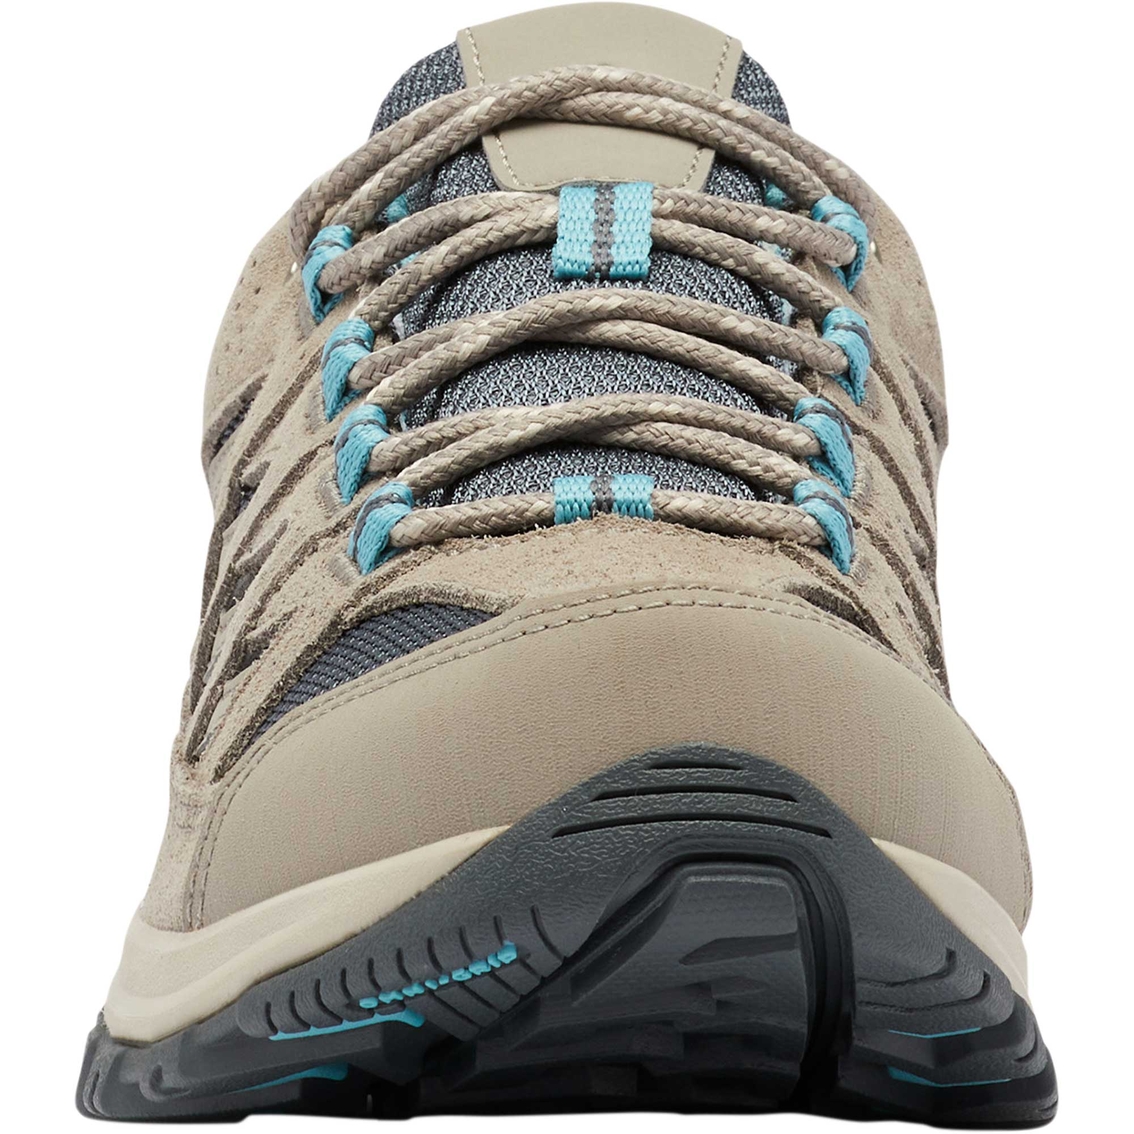 Columbia Women's Crestwood Hiking Boots - Image 6 of 9